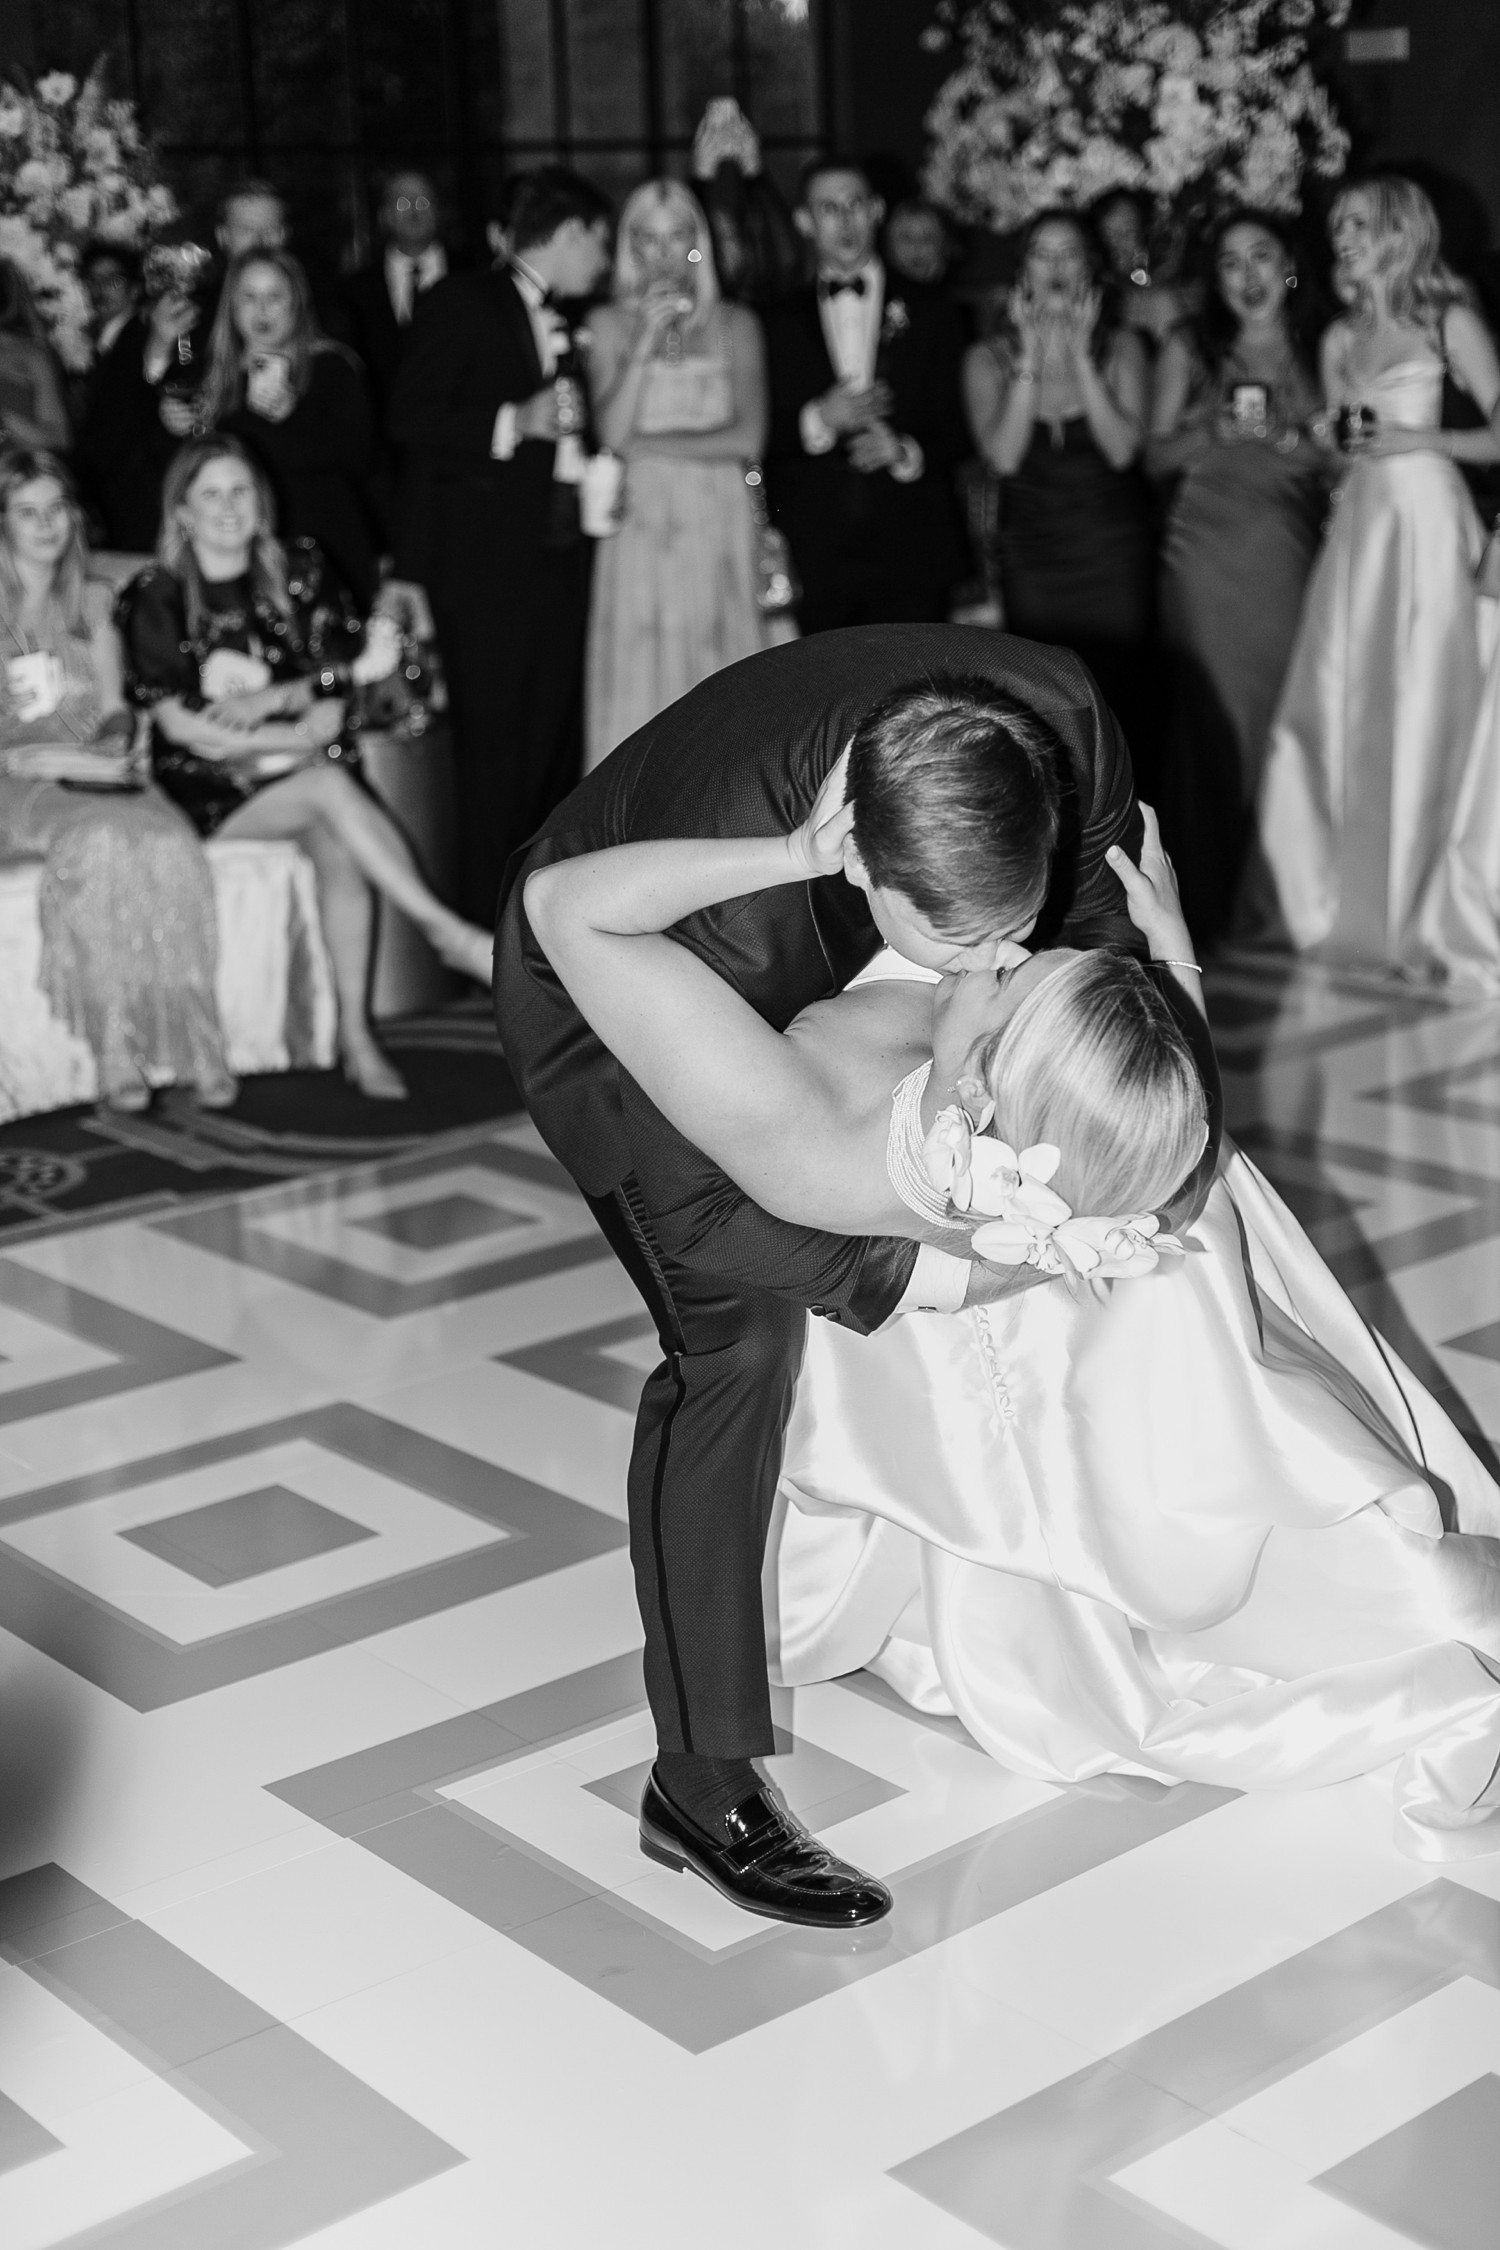 Groom dipping bride for kiss during first dance.